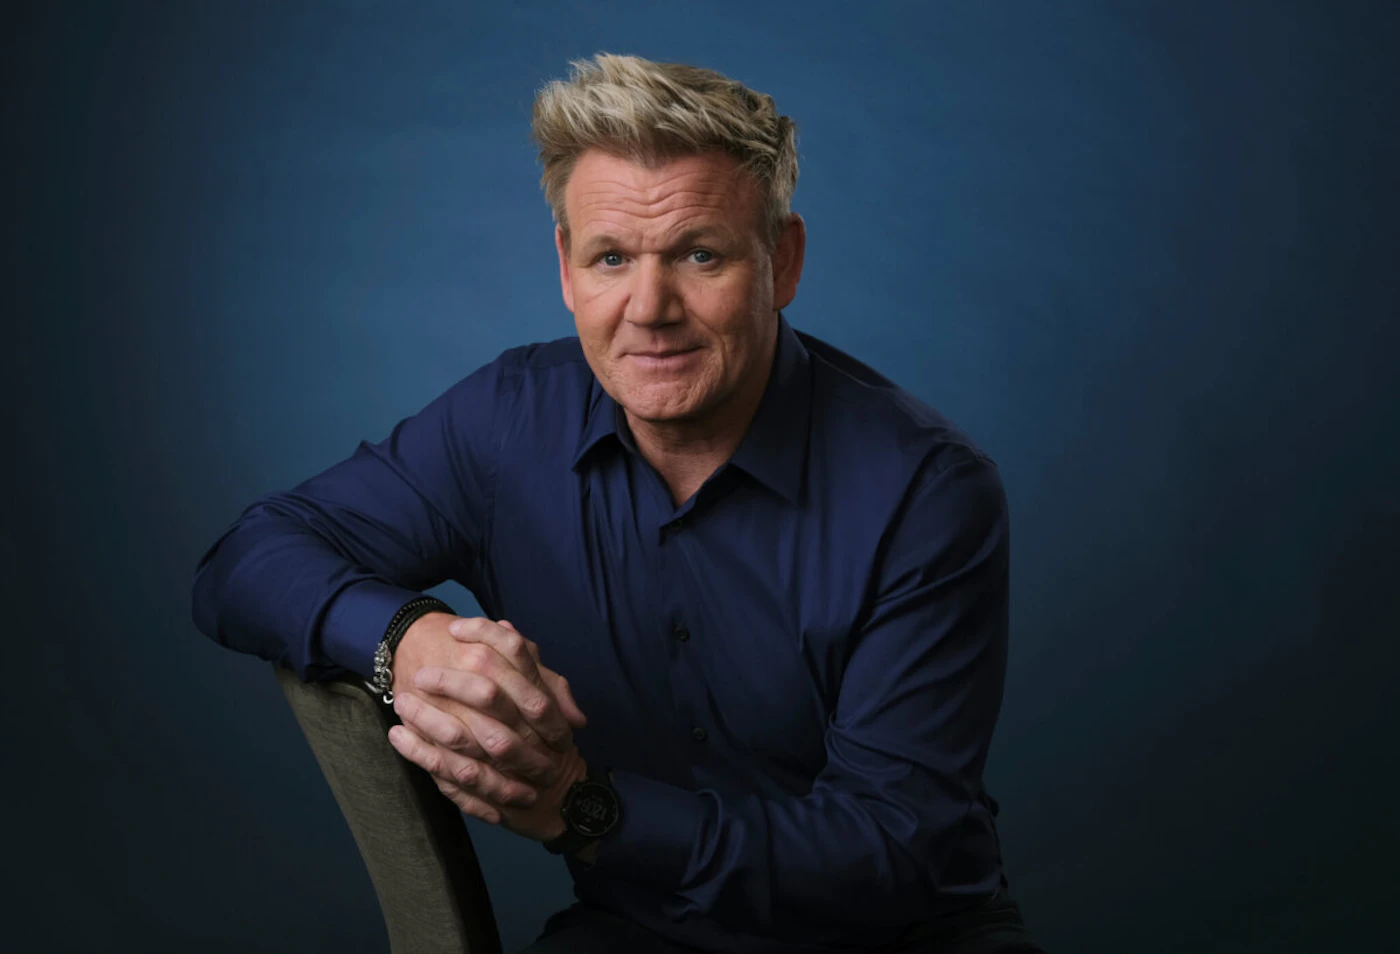 Chef and TV personality Gordon Ramsay has a Durham chef featured on the latest season of "Gordon Ramsay's Food Stars." (Photo by Chris Pizzello/Invision/AP, File)